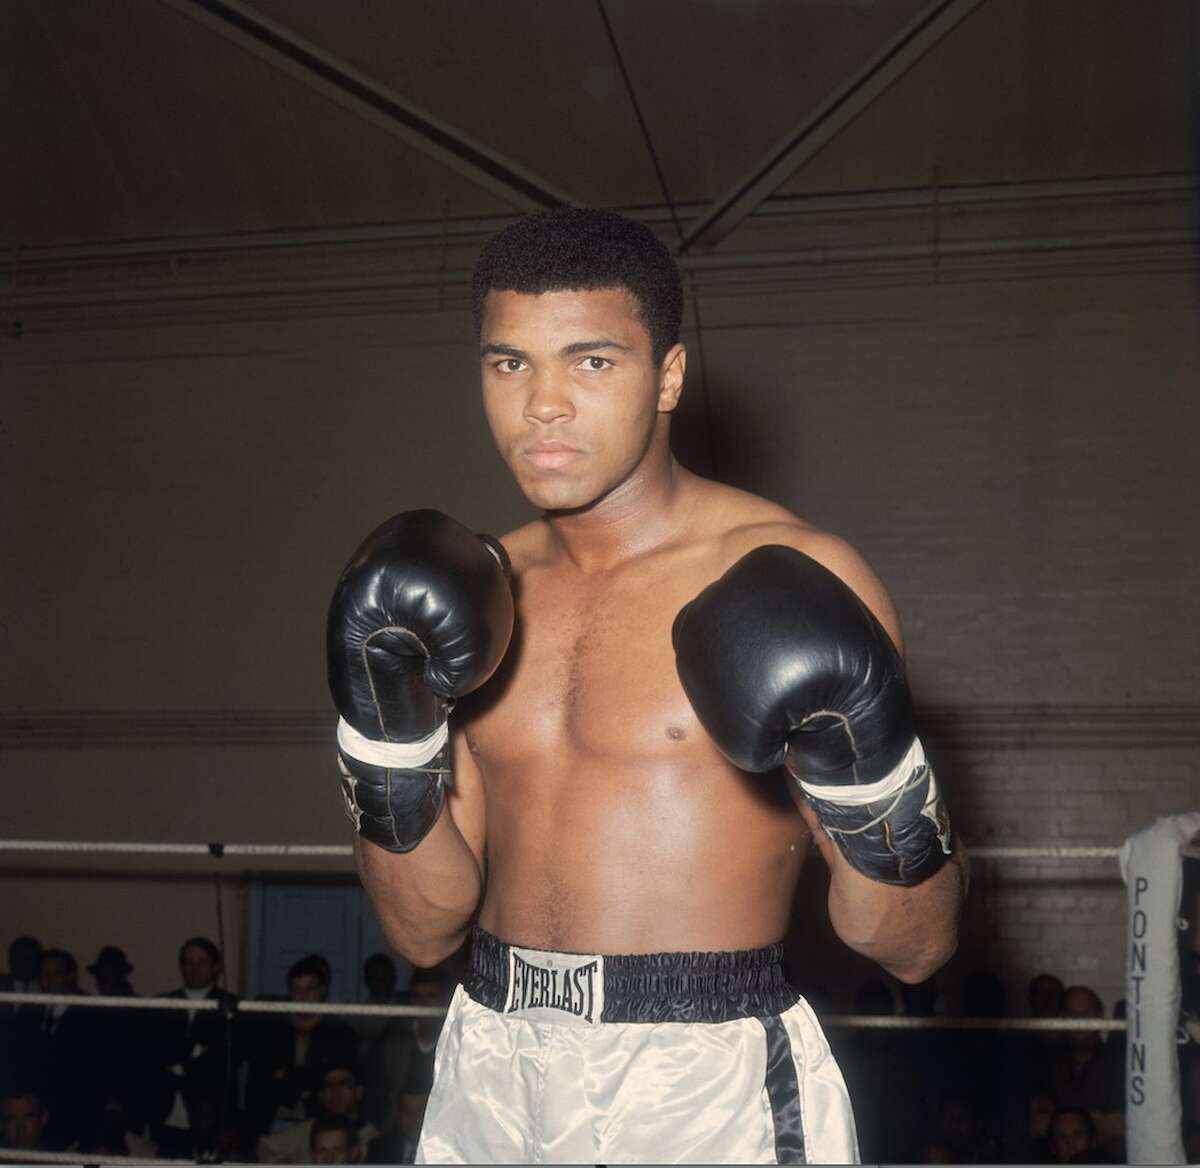 In 1965, Cassius Clay changed his name to Muhammad Ali. The Ridgefield Playhouse will screen “Muhammad Ali: The Whole Story” Sunday, July 10, thanks to the Emmy Award-winning husband-and-wife documentary team of Sandra and Joseph Consentino.